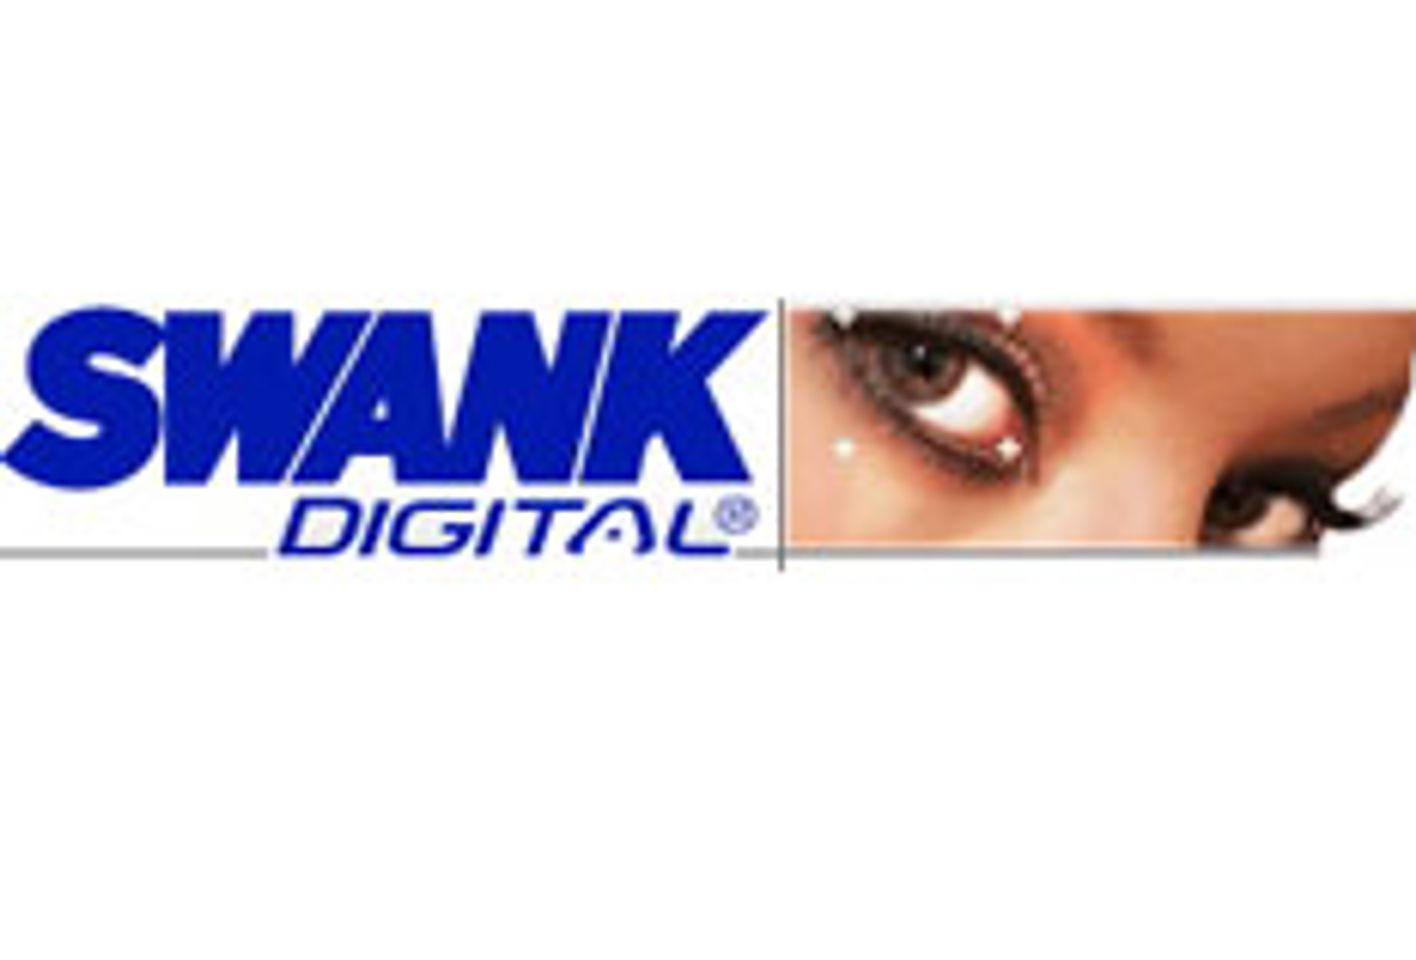 Swank Digital Decides it’s Time for ‘Sex with the Legal Teen ‘